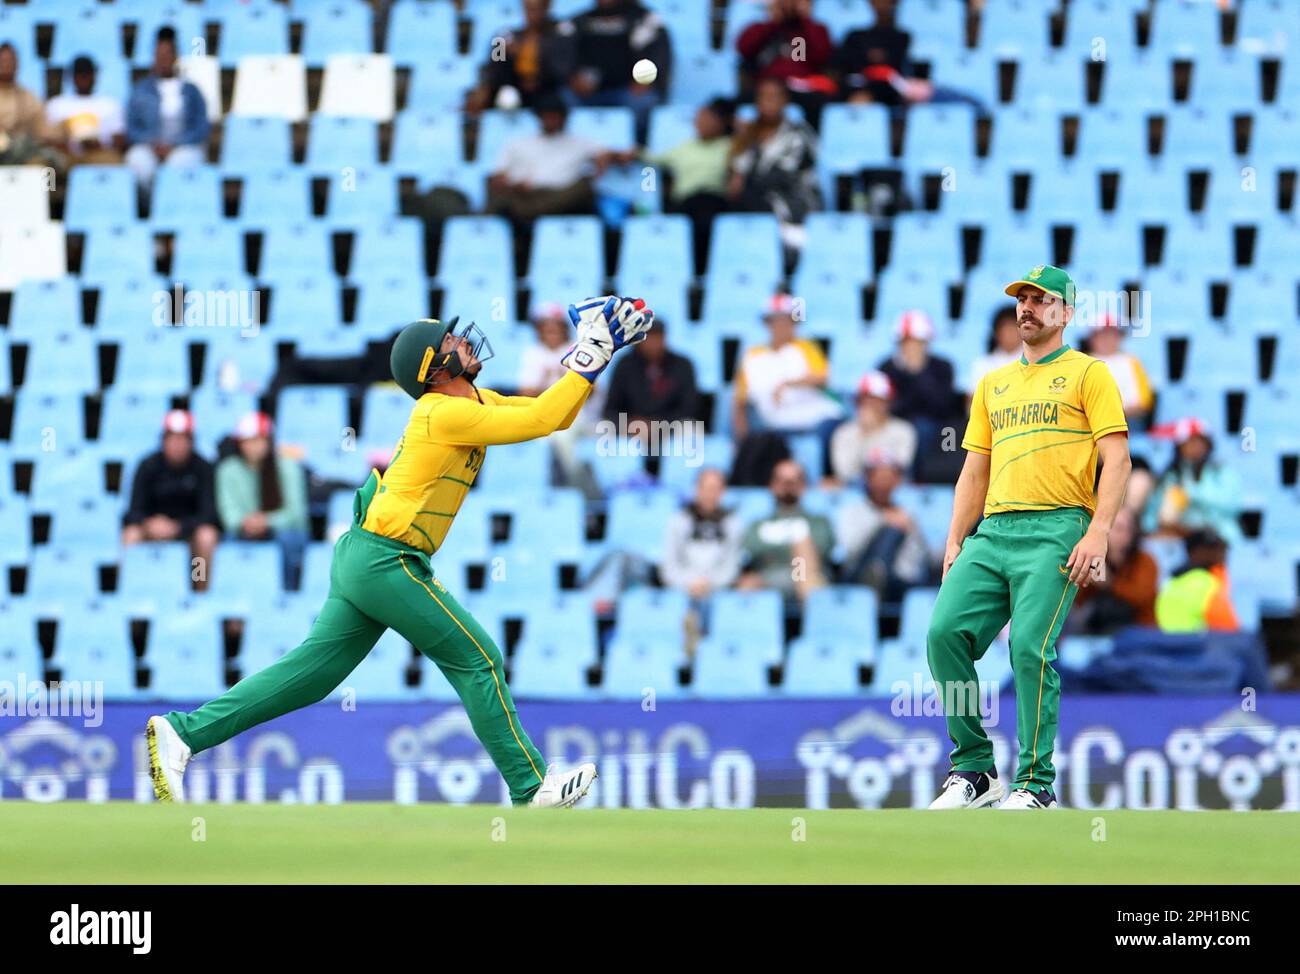 Cricket - First Twenty20 - South Africa v West Indies - SuperSport Park Cricket Stadium, Centurion, South Africa - March 25, 2023 South Africa's Quinton de Kock takes a catch to dismiss West Indies' Kyle Mayers off the bowling of off the bowling of Bjorn Fortuin REUTERS/Siphiwe Sibeko Stock Photo